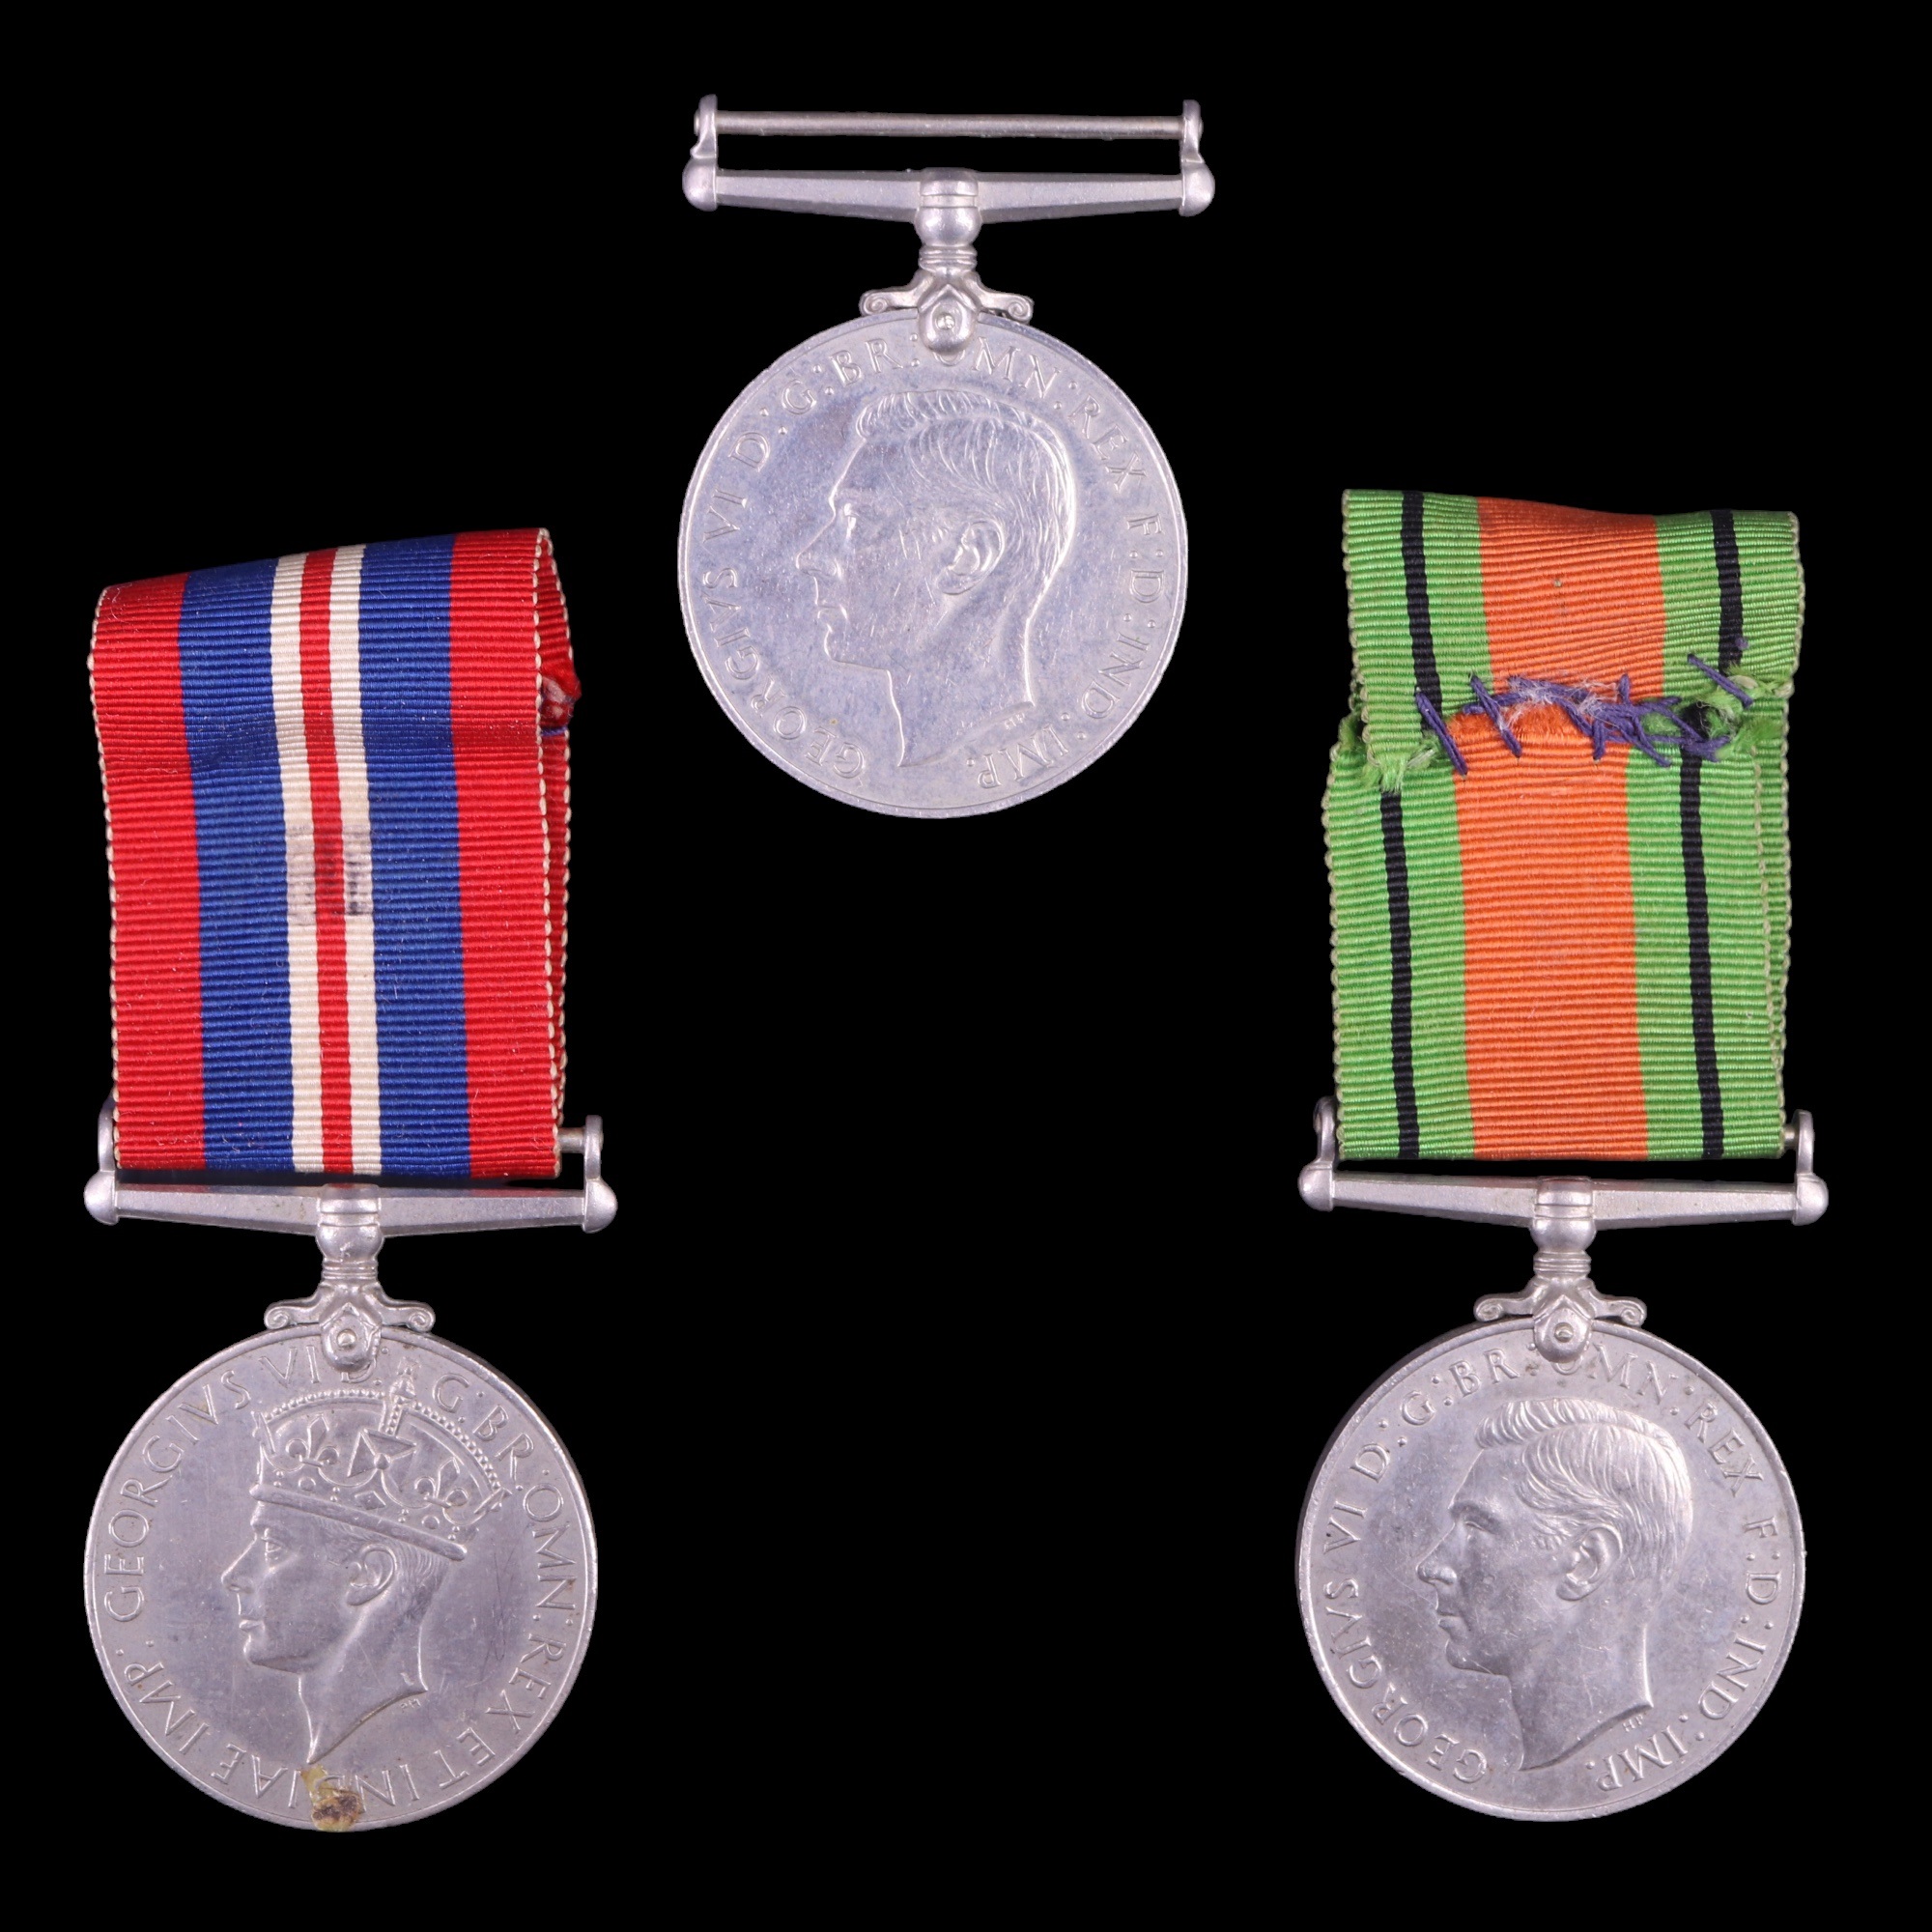 Second World War campaign medals and medal ribbon bars etc - Image 2 of 5